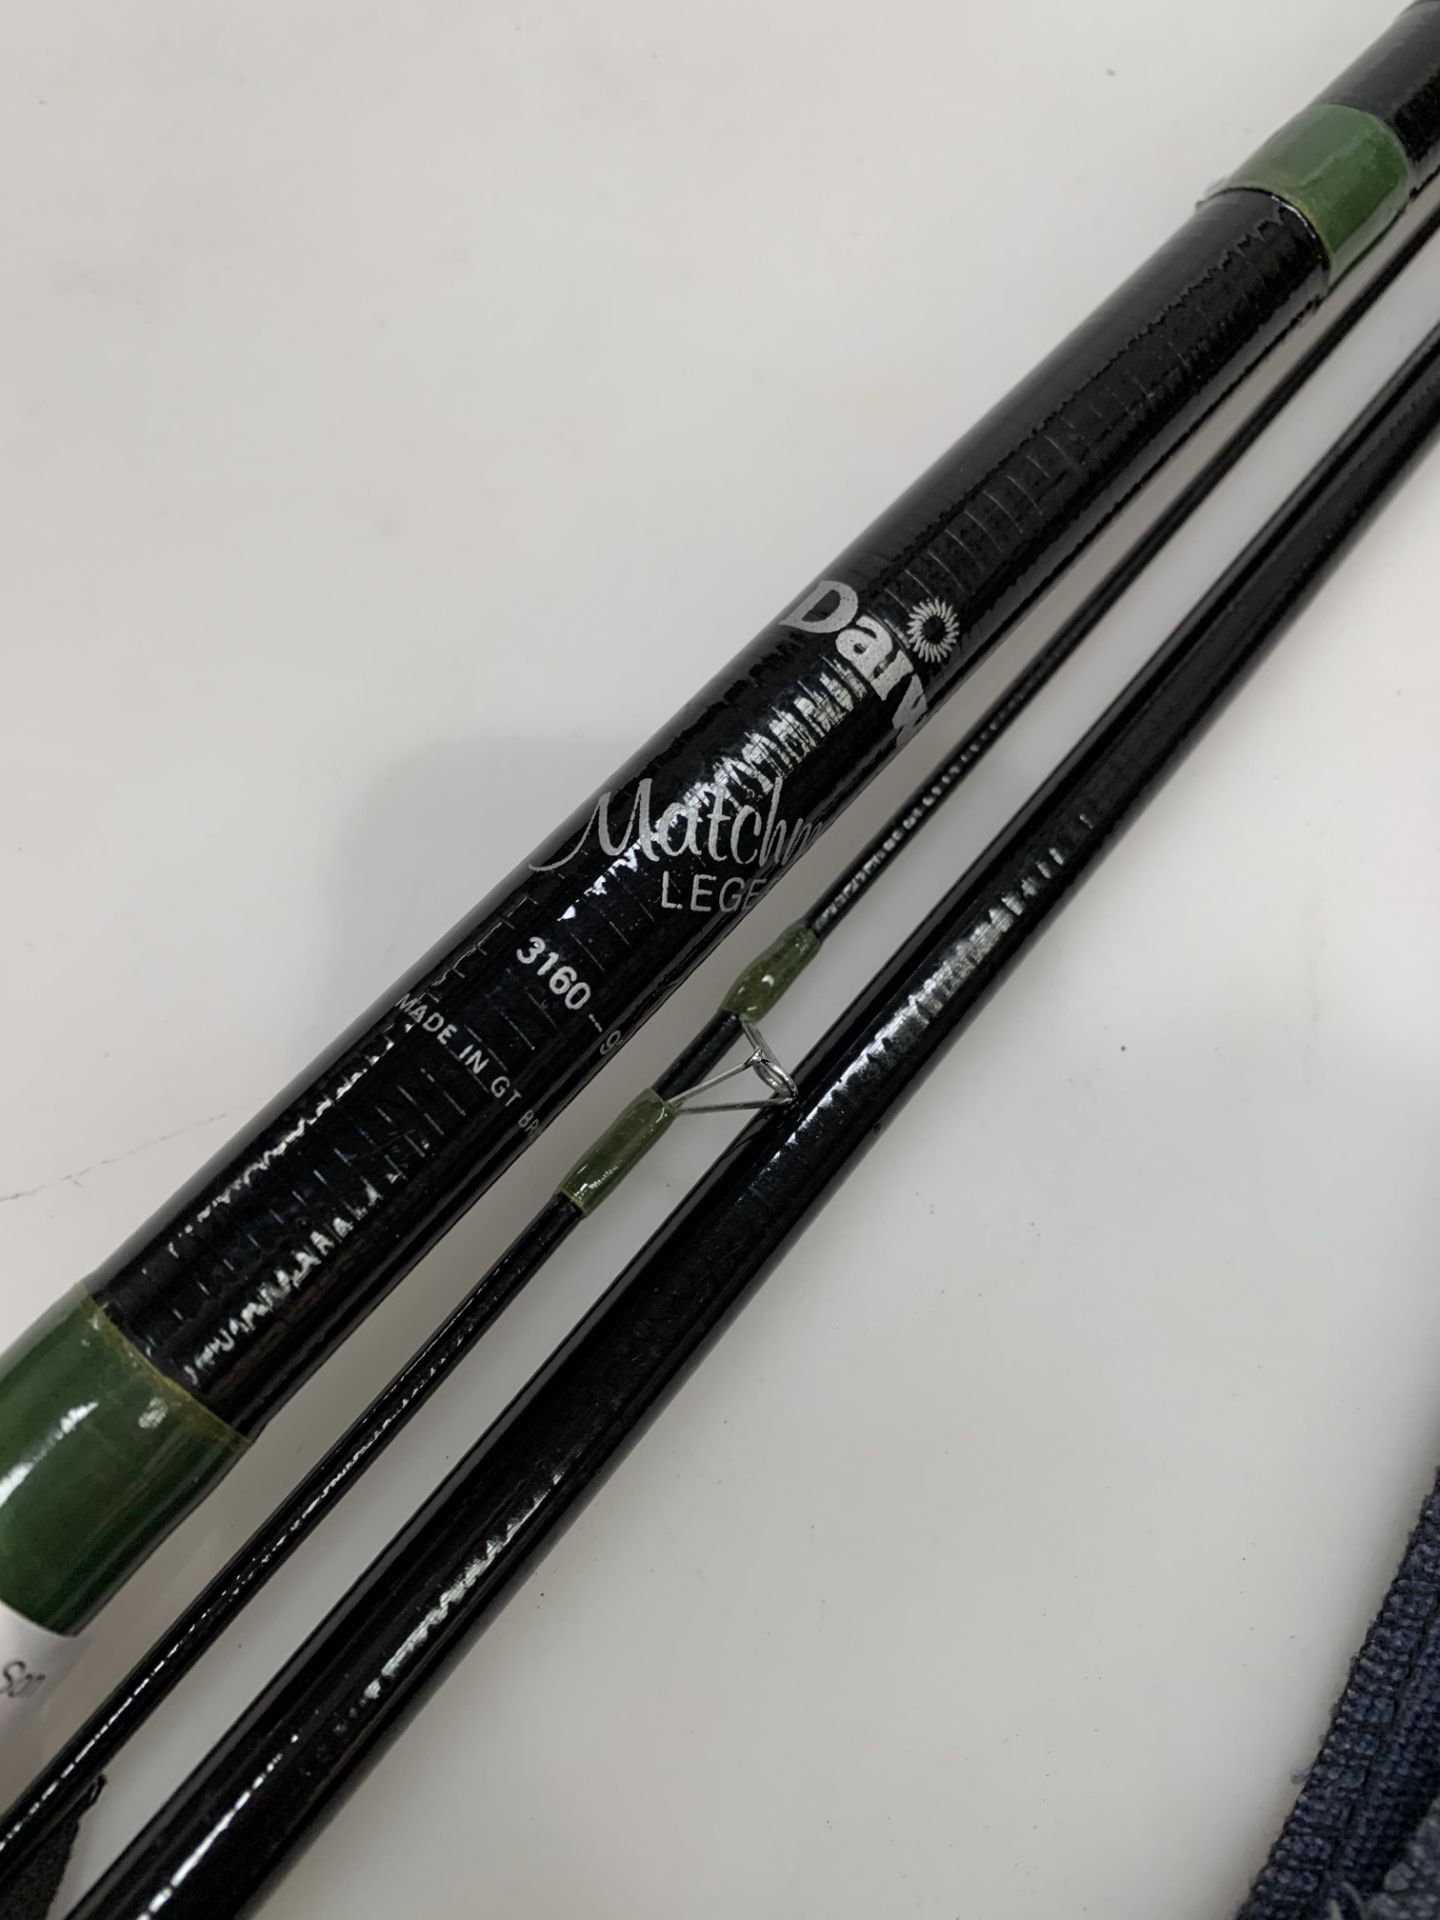 A Daiwa Matchman Leger 3160 9' three-piece fishing rod complete with bag